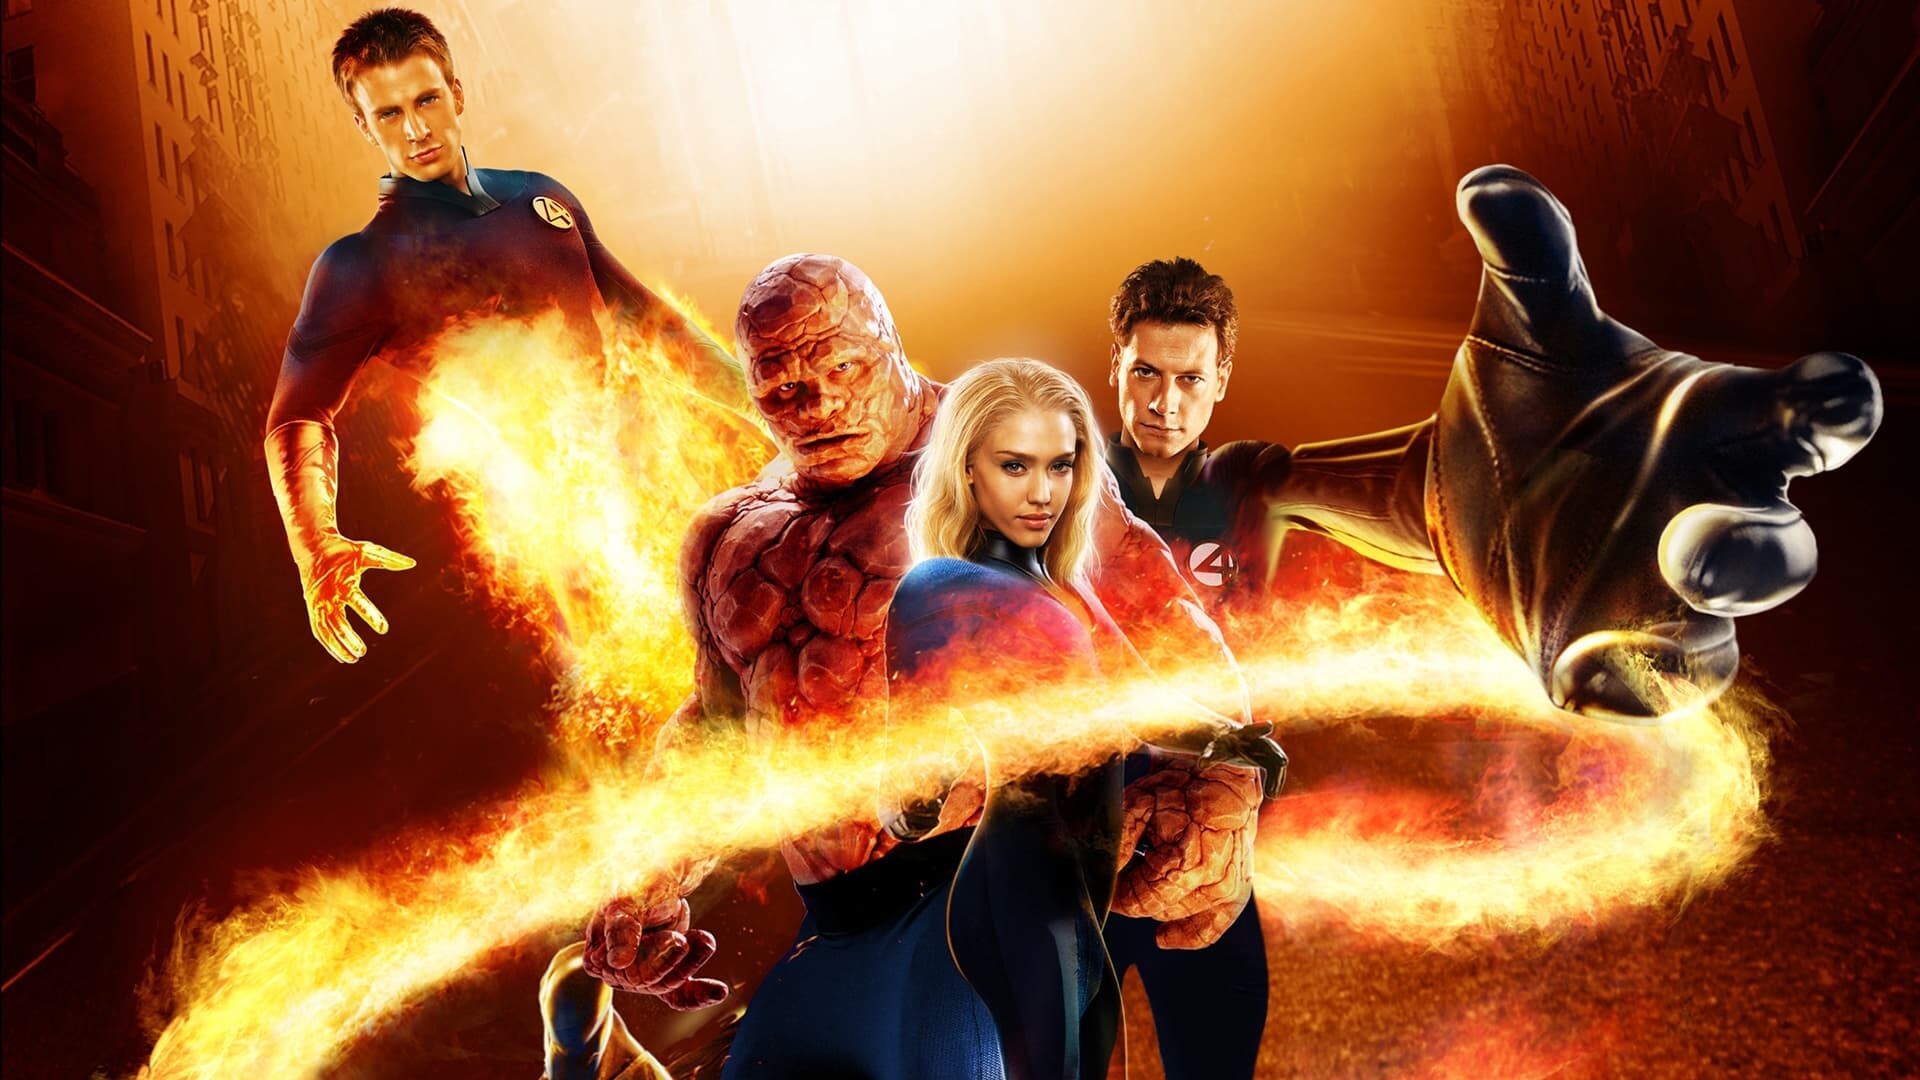 Human Torch: Fantastic Four: Rise of the Silver Surfer, 2007, Marvel Universe. 1920x1080 Full HD Wallpaper.